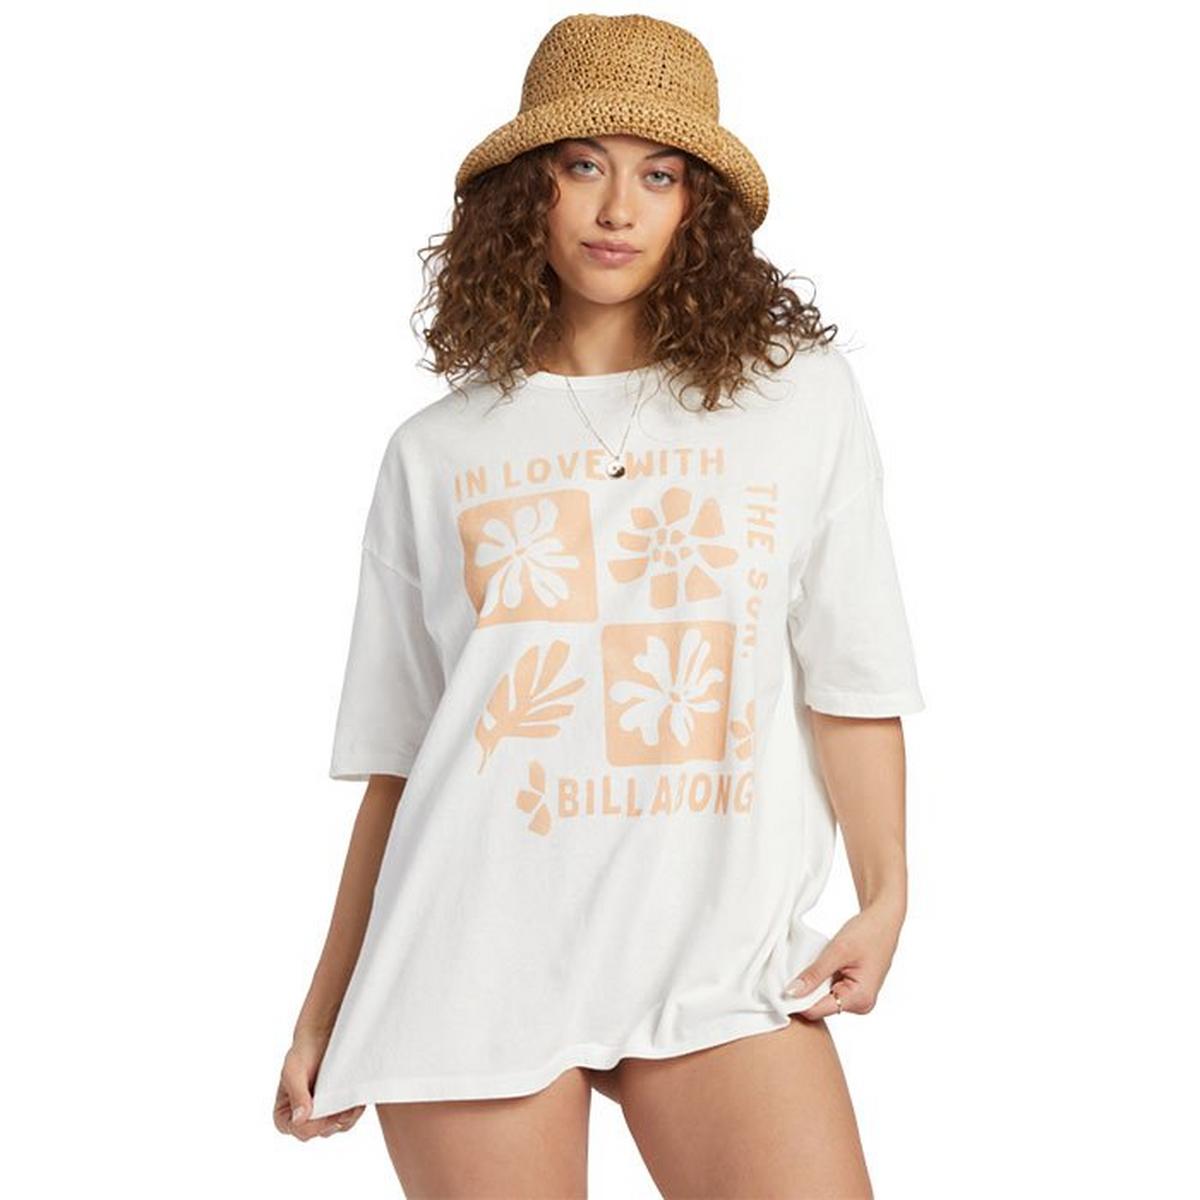 Women's In Love With The Sun T-Shirt